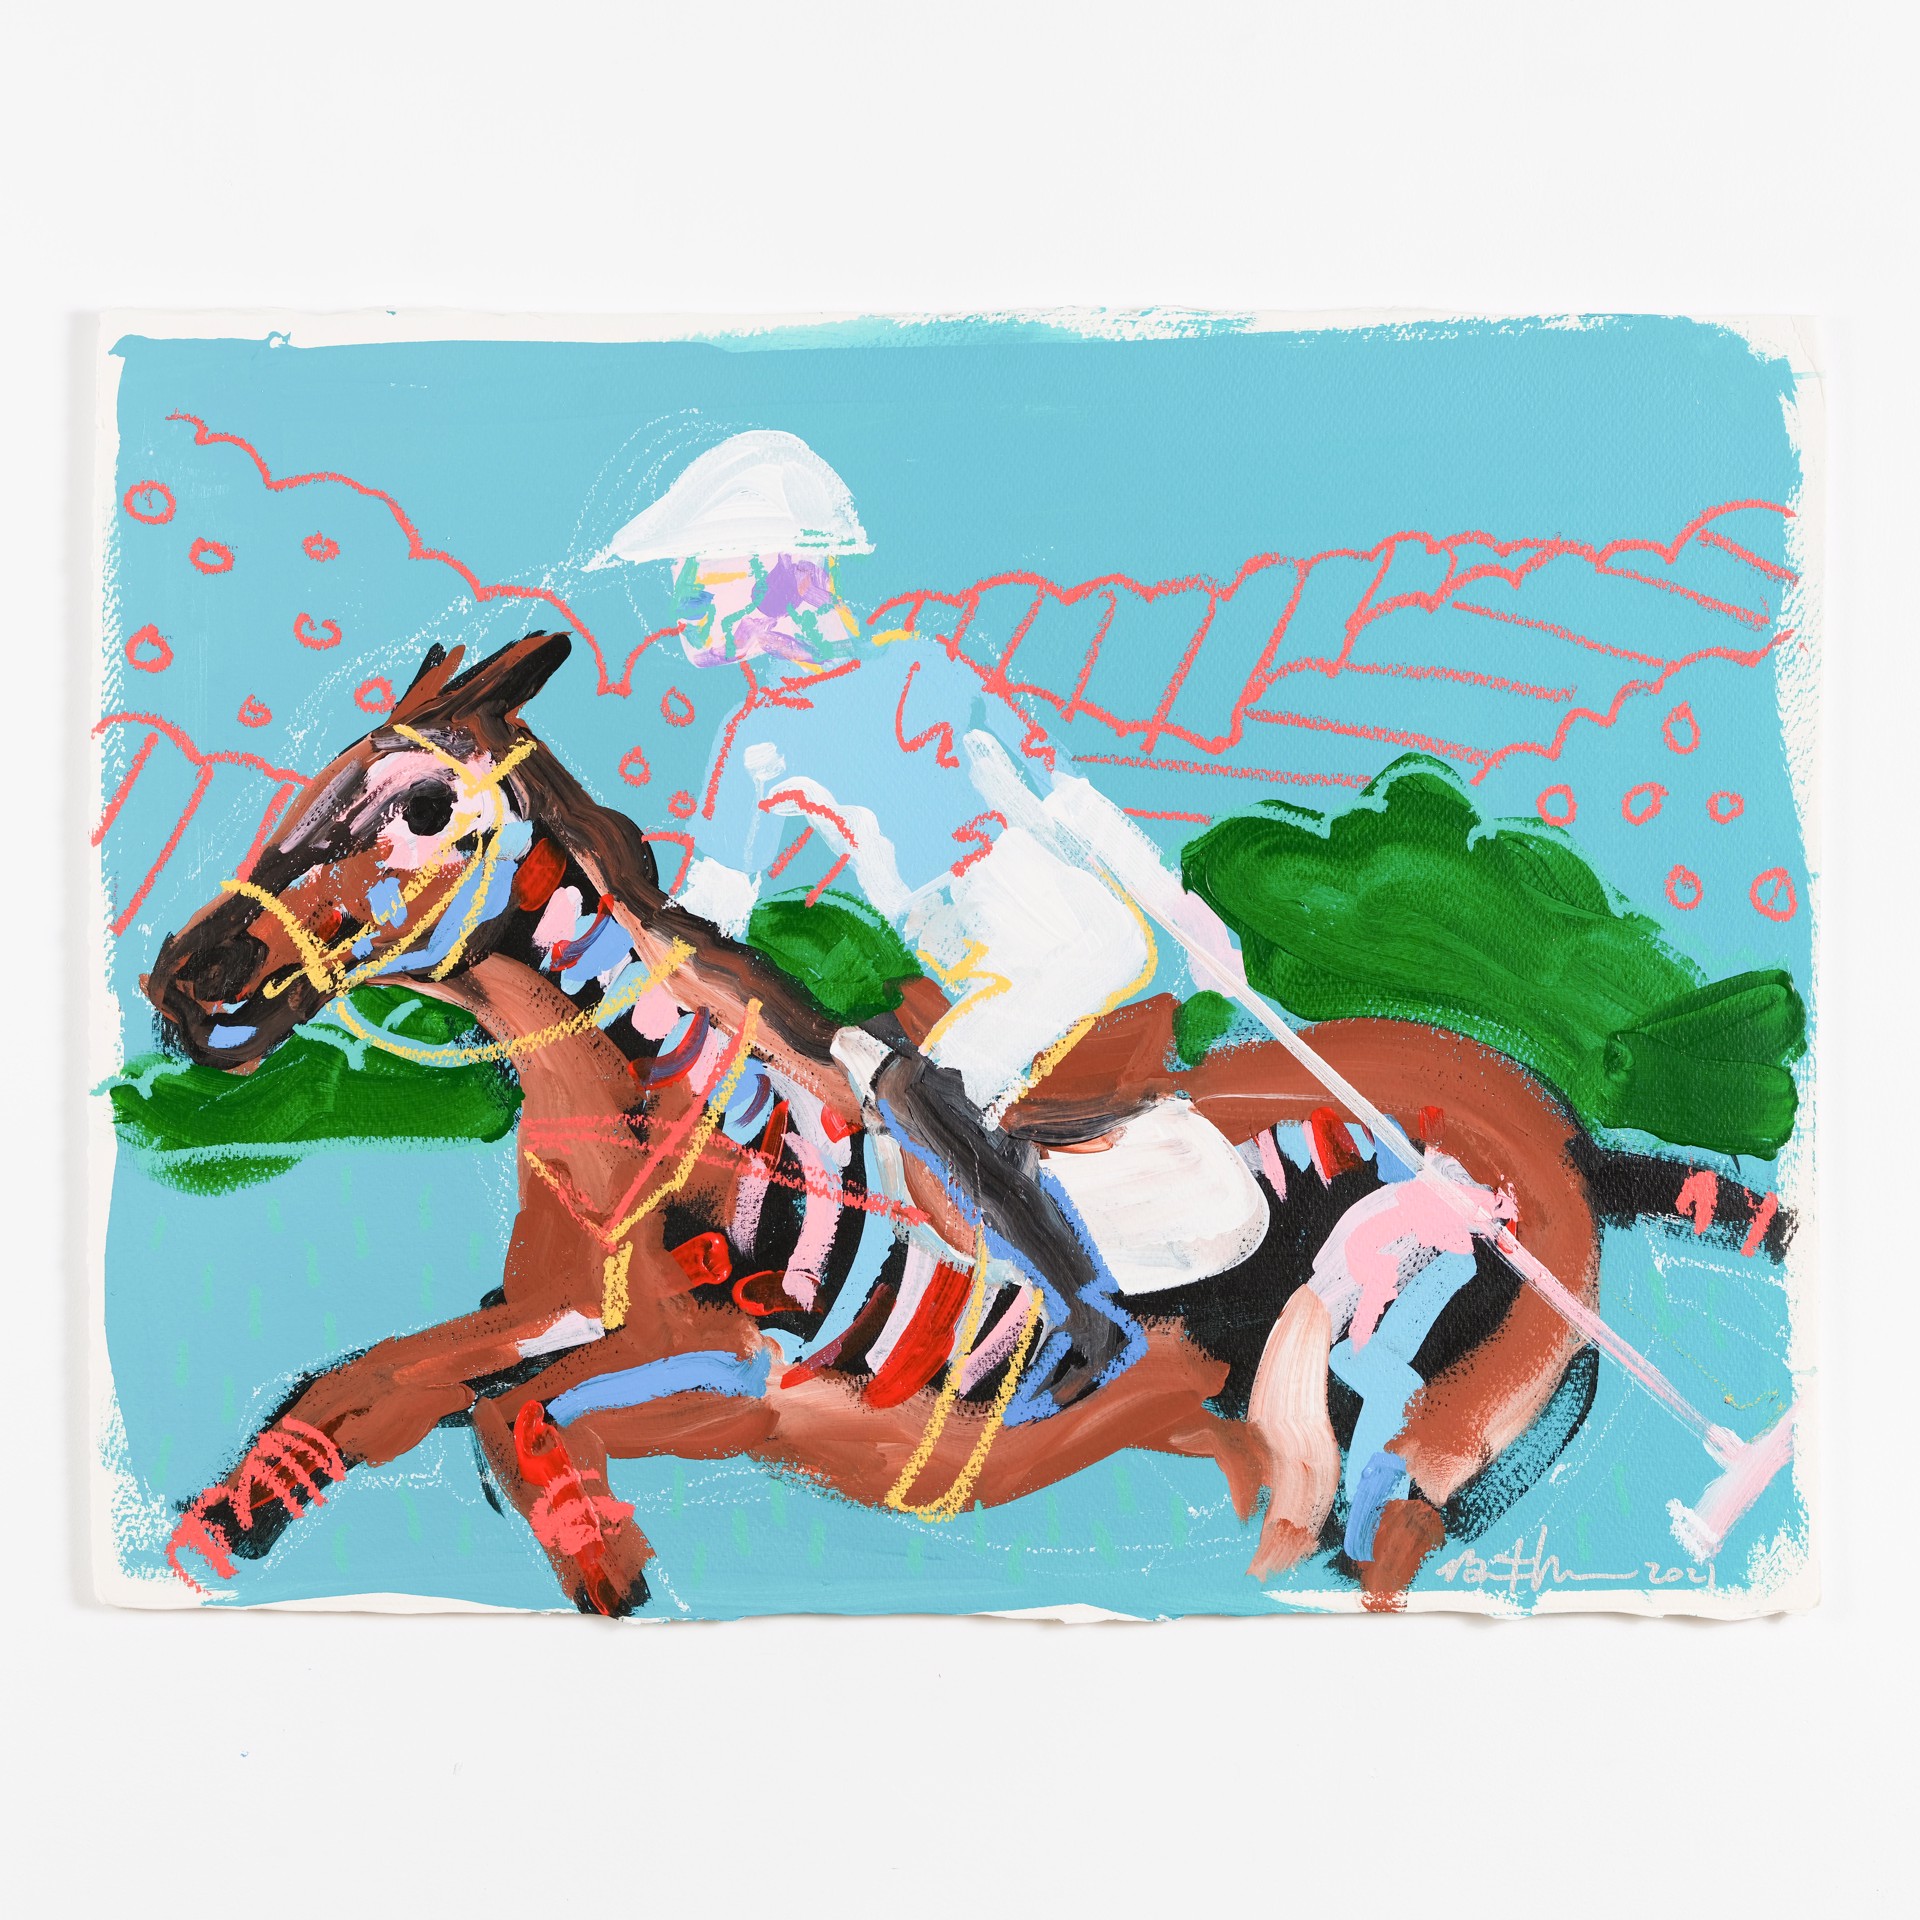 Polo Series (set of 5) by Bradley Theodore